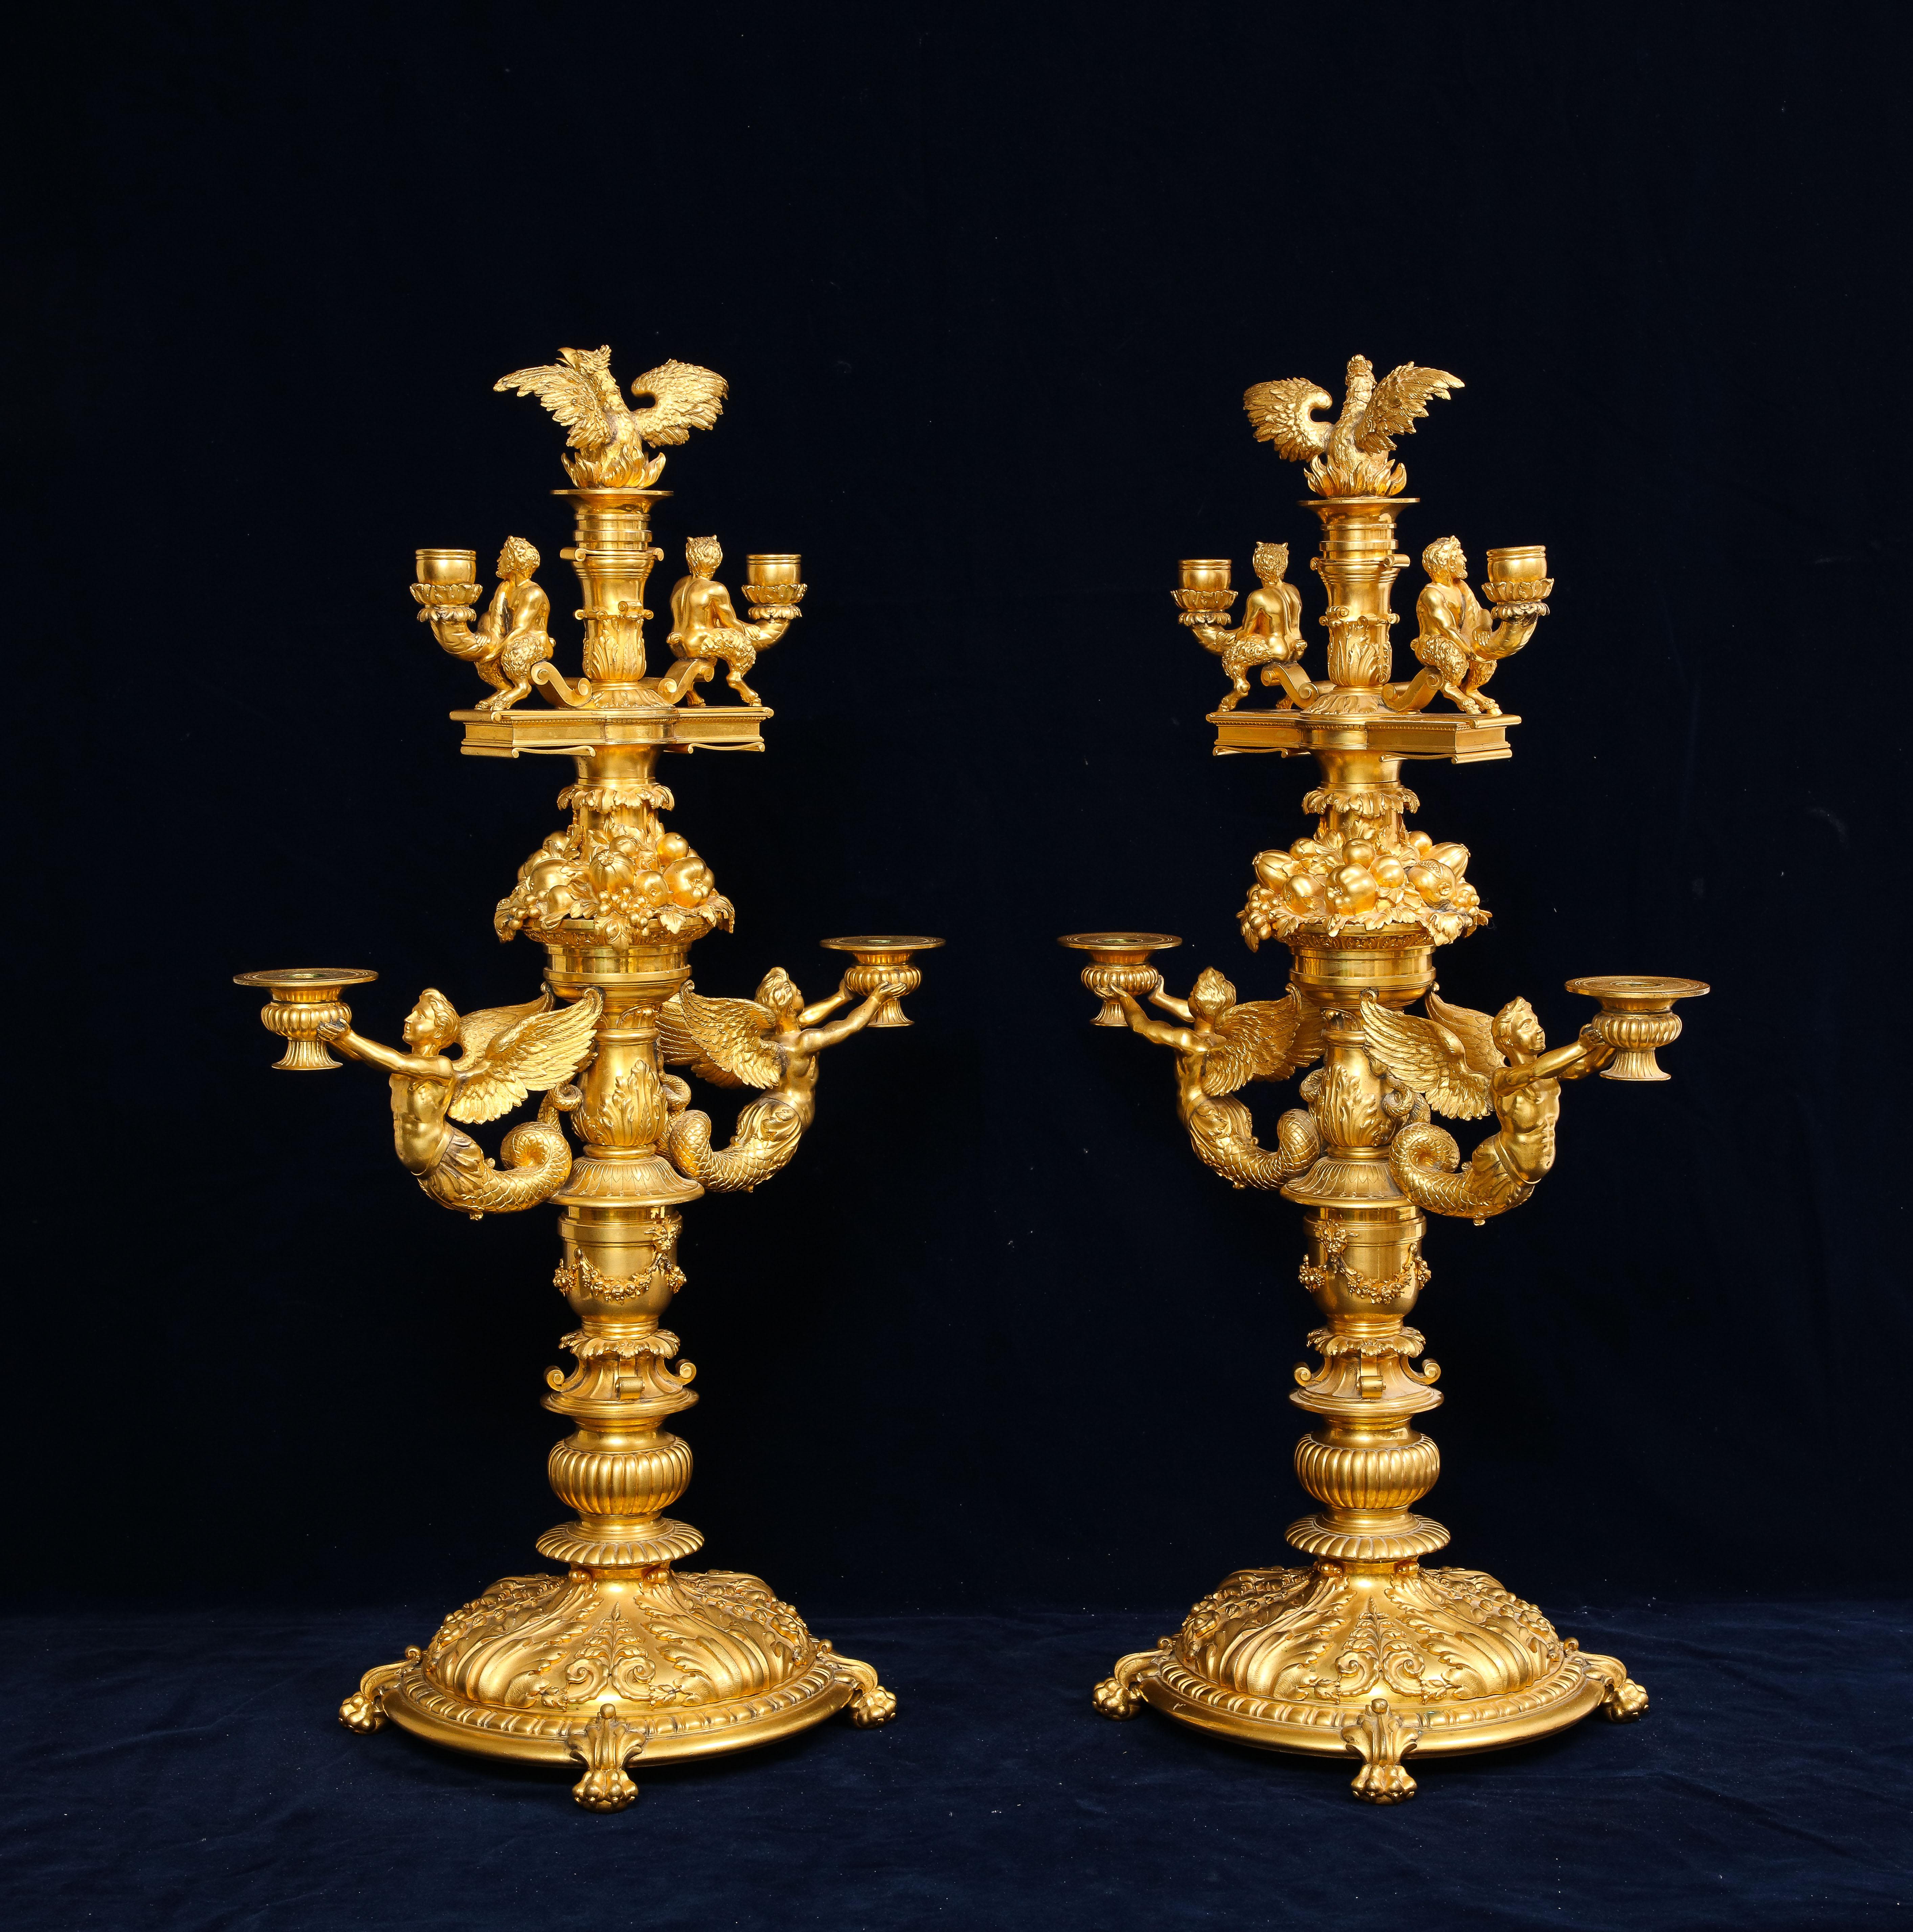 Louis XVI Marvelous Pair of 19th C. French Ormolu Four Arm Candelabras, Signed P. Canaux For Sale